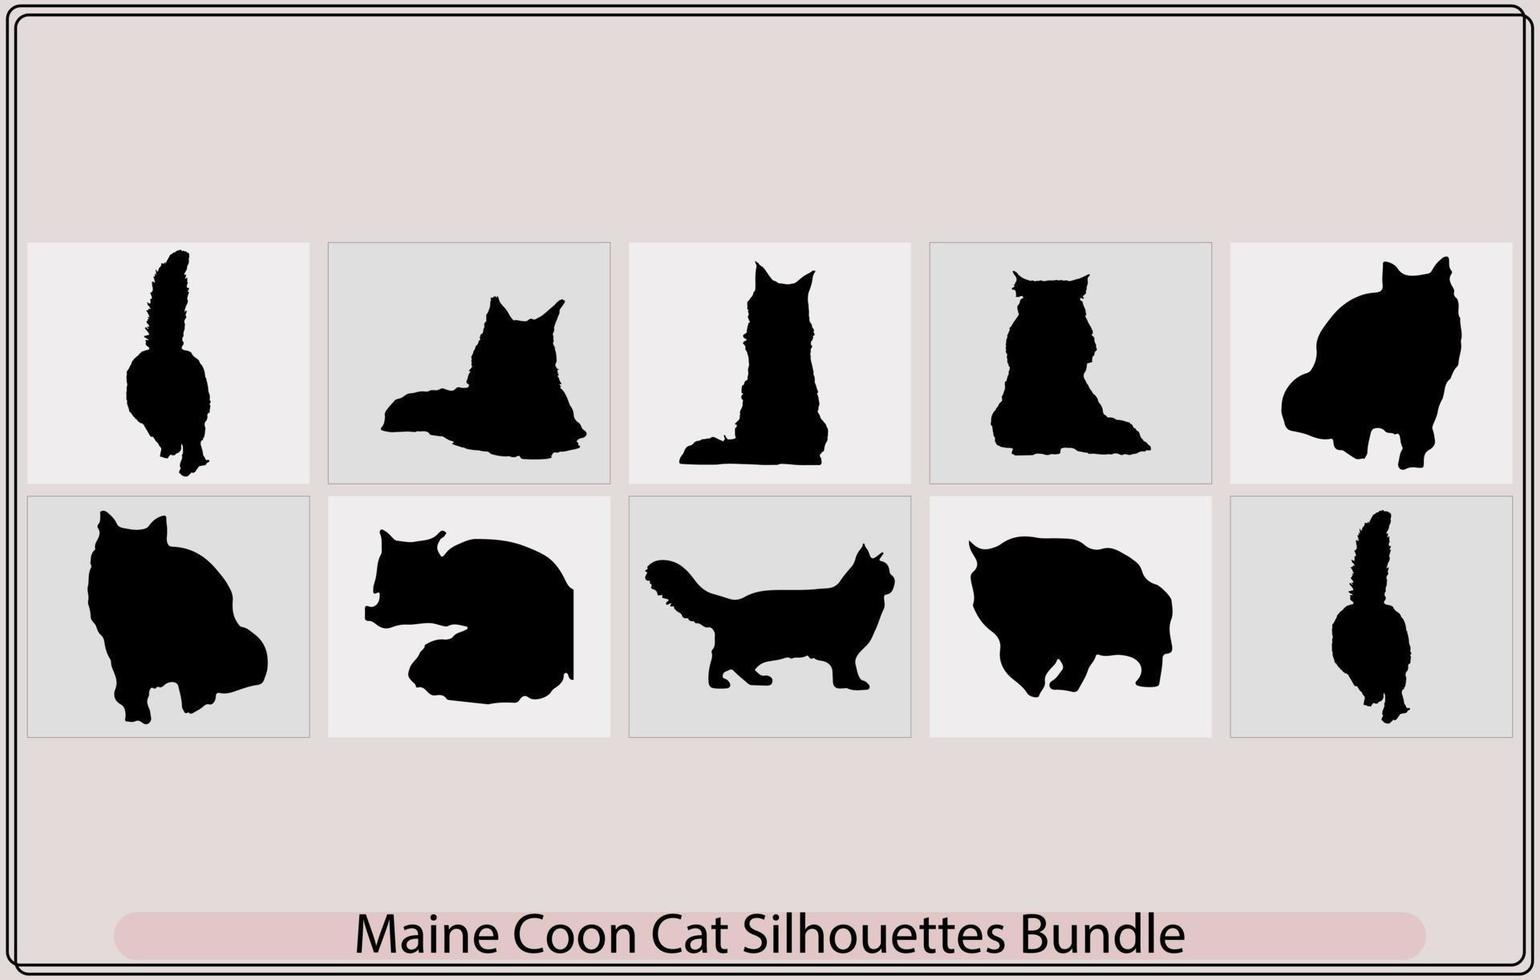 Cat silhouettes,Maine Coon cat icons and silhouettes,Sitting Maine Coon Cat Felis Catus On a Front View Silhouette, vector